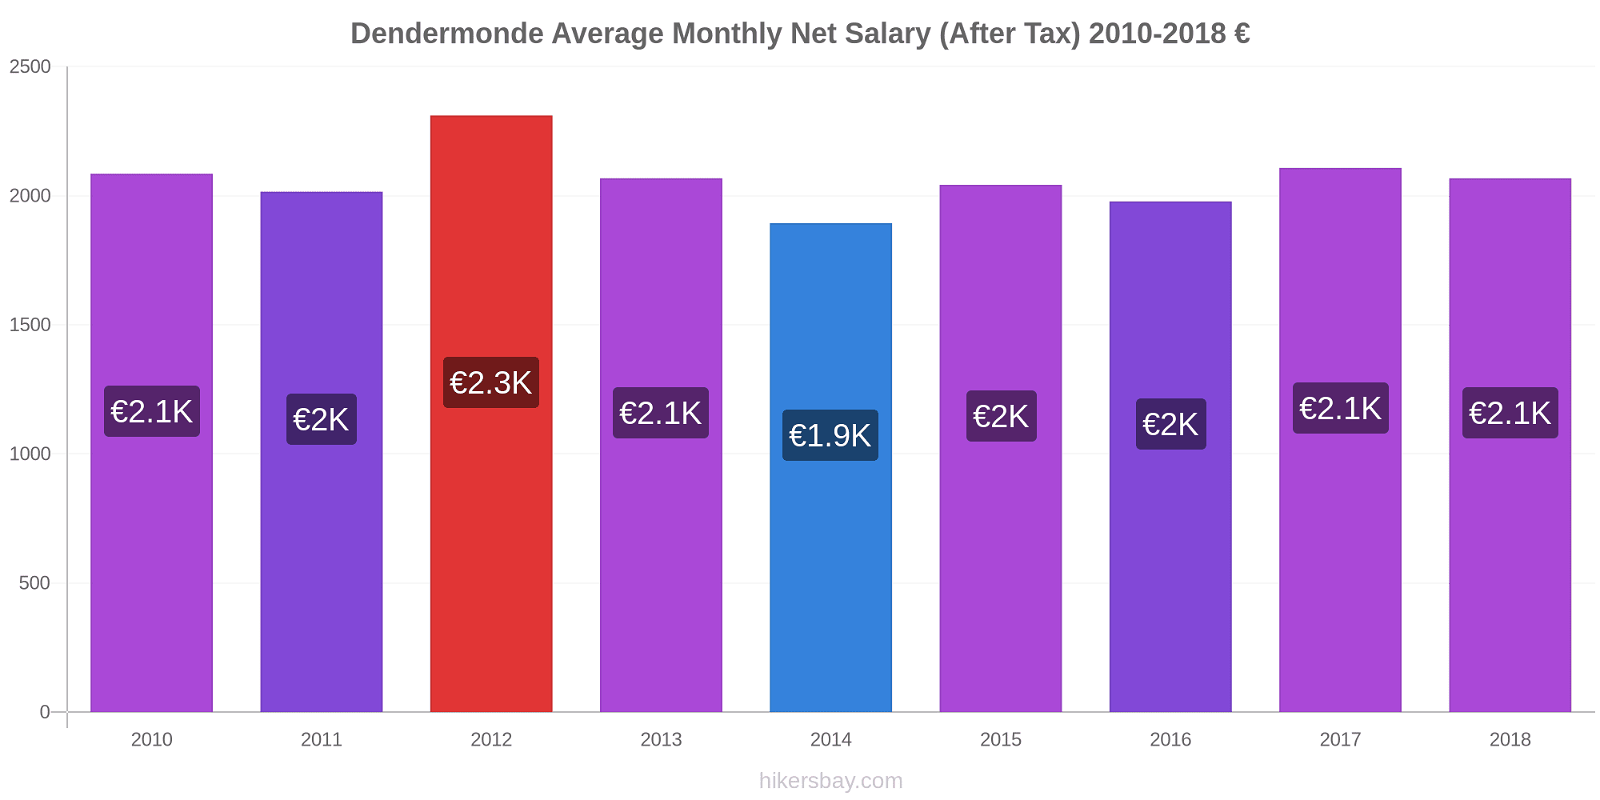 Dendermonde price changes Average Monthly Net Salary (After Tax) hikersbay.com